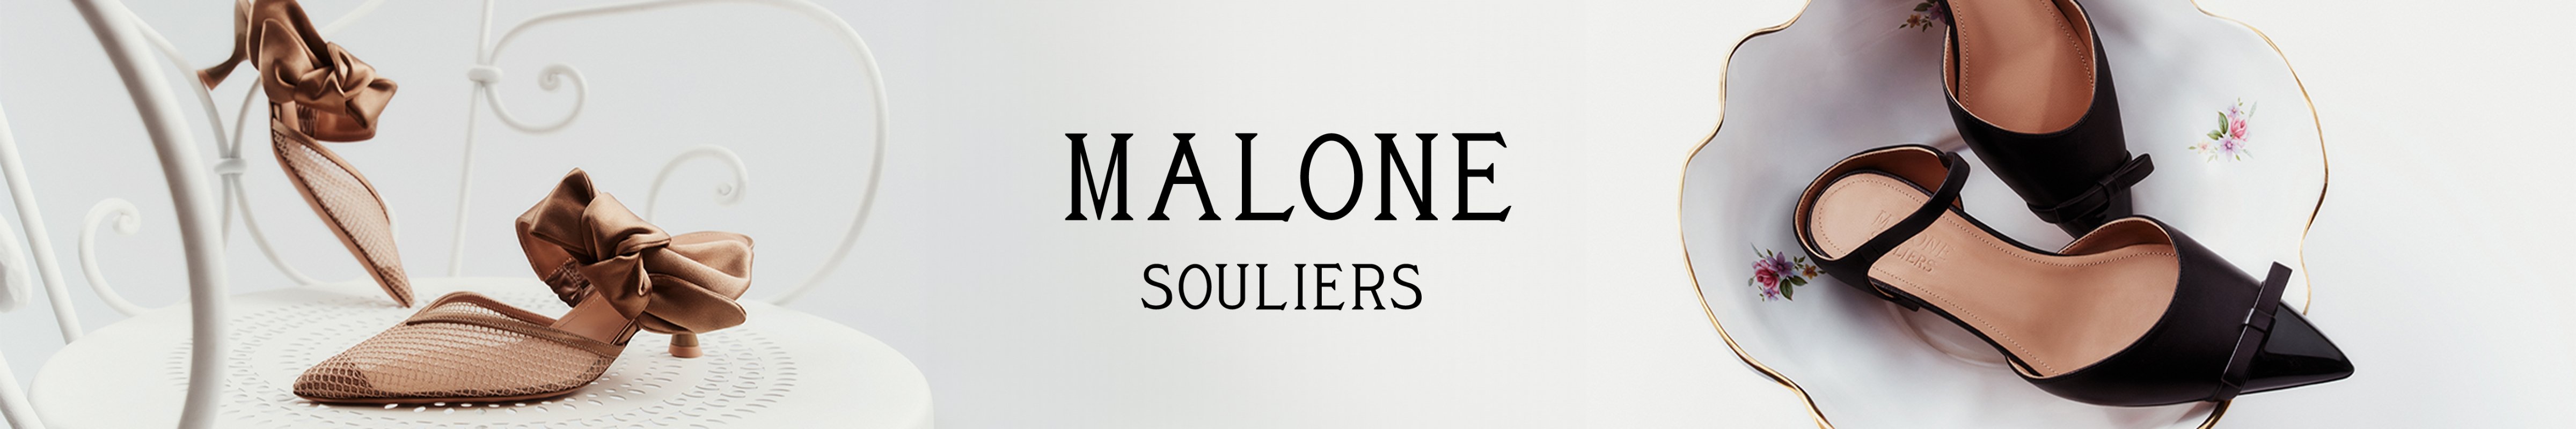 malone-souliers-banner